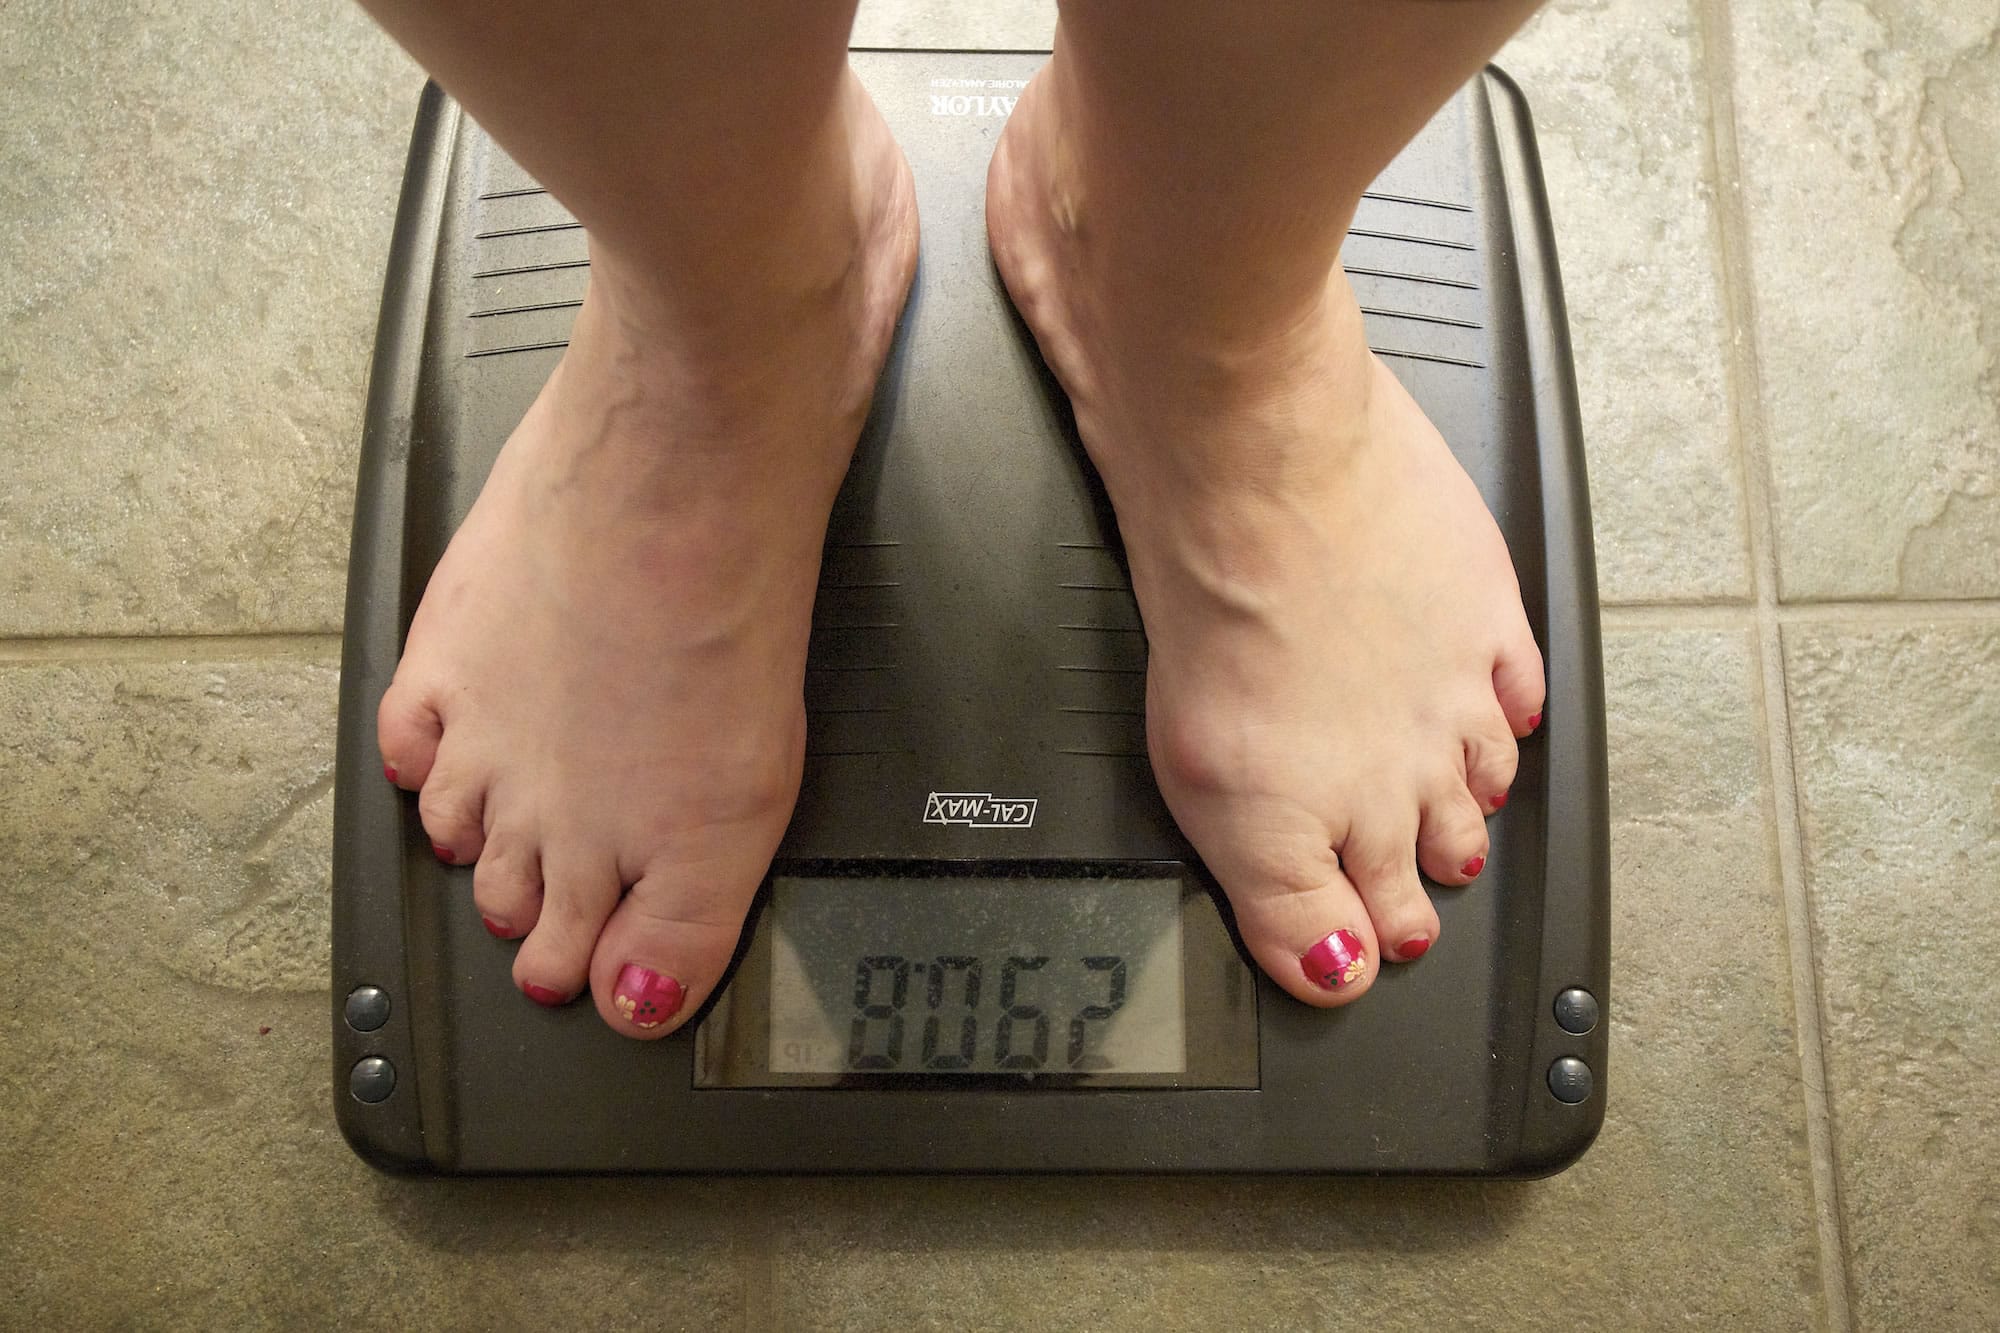 Laina Harris steps on the scale in her Camas home Wednesday. Harris weighs herself every day to monitor her weight-loss progress.